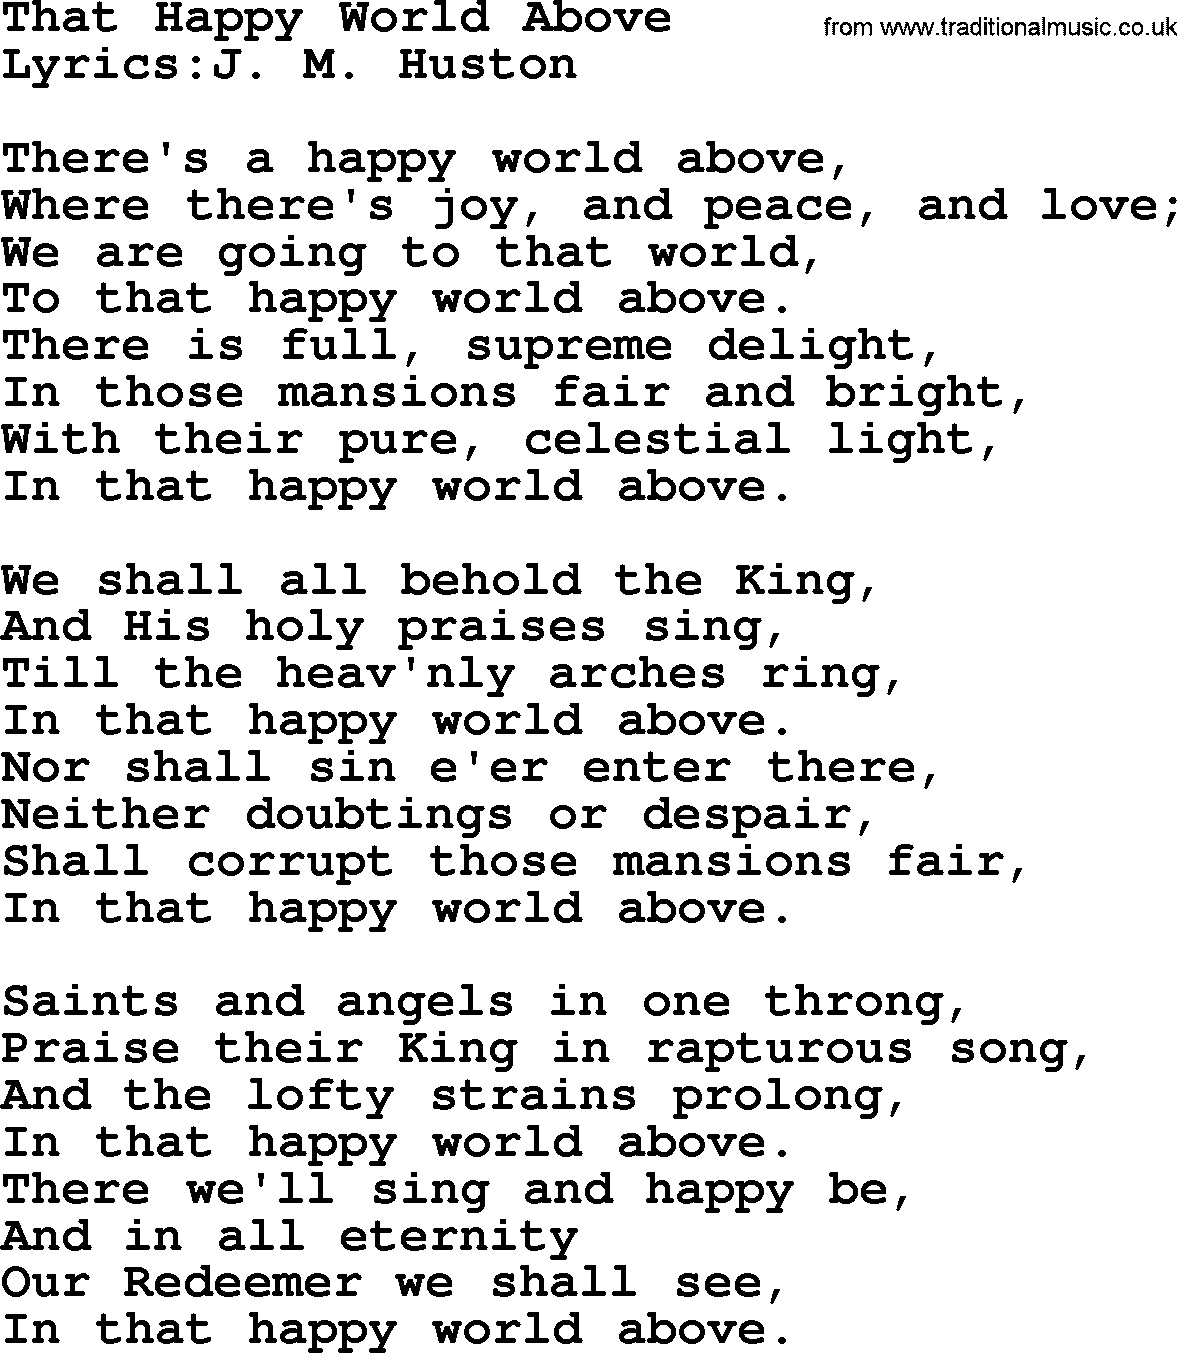 Songs and Hymns about Heaven: That Happy World Above lyrics with PDF